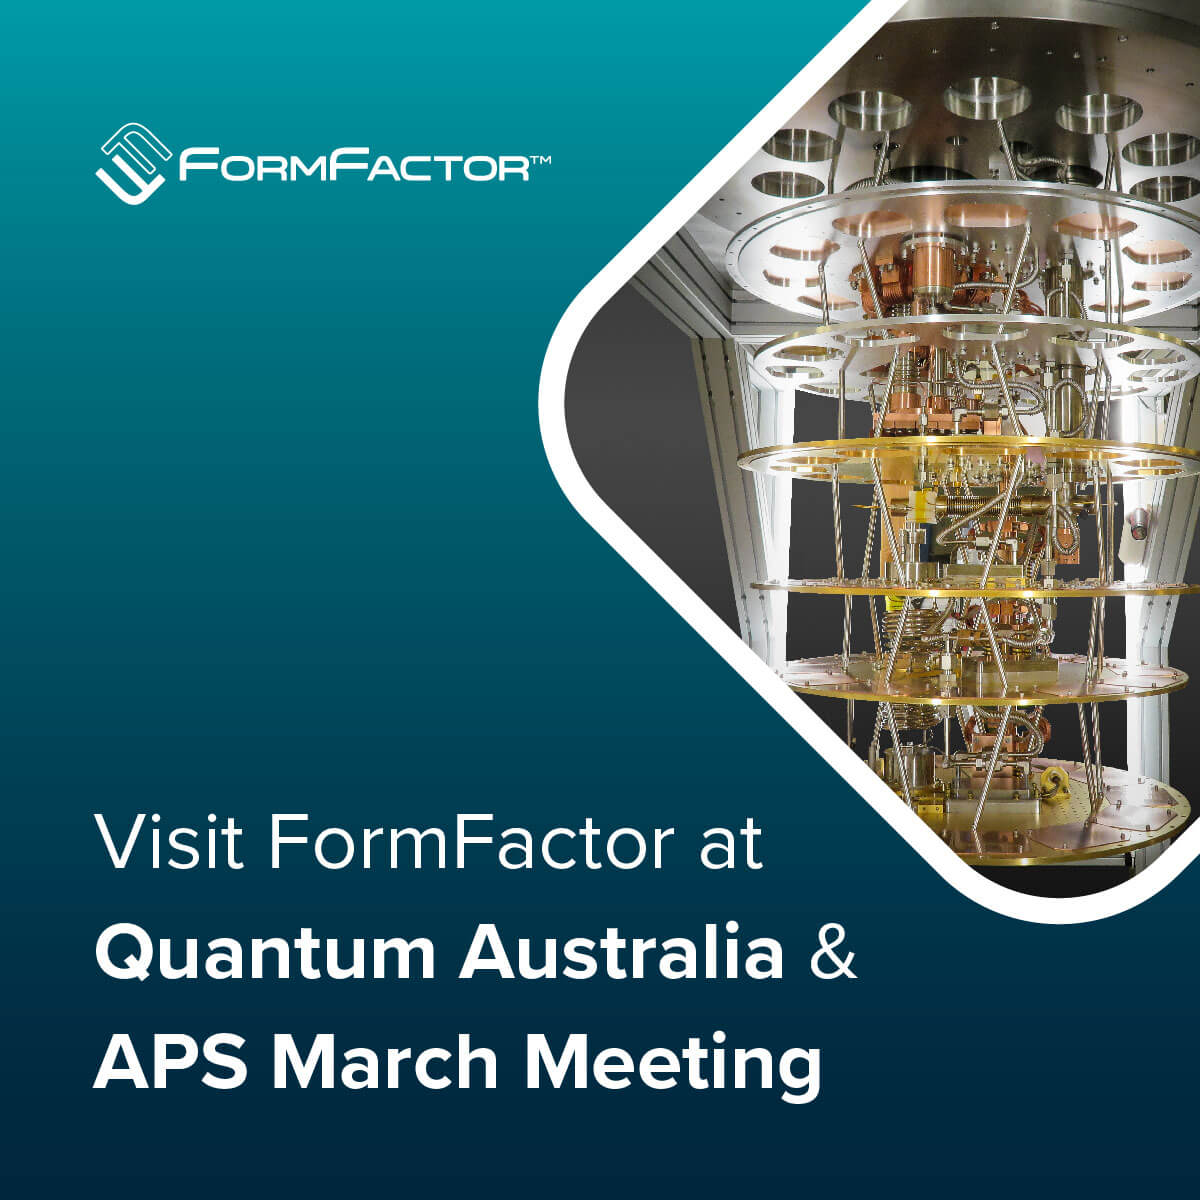 Upcoming Events - Quantum Australia and APS March Meeting